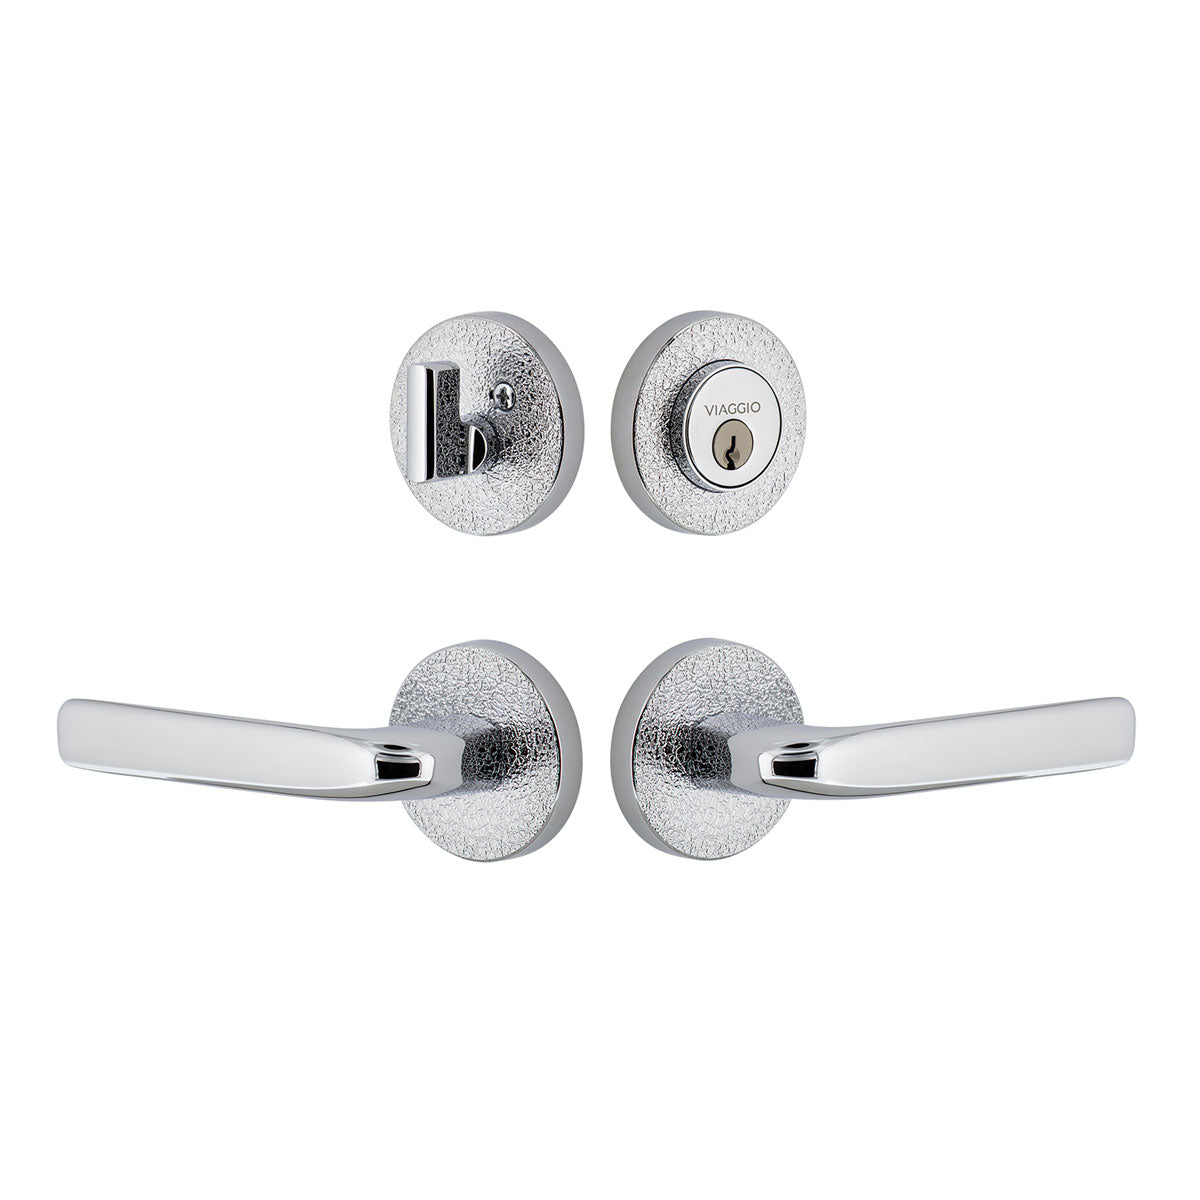 Circolo Leather Rosette Entry Set with Bella Lever in Bright Chrome